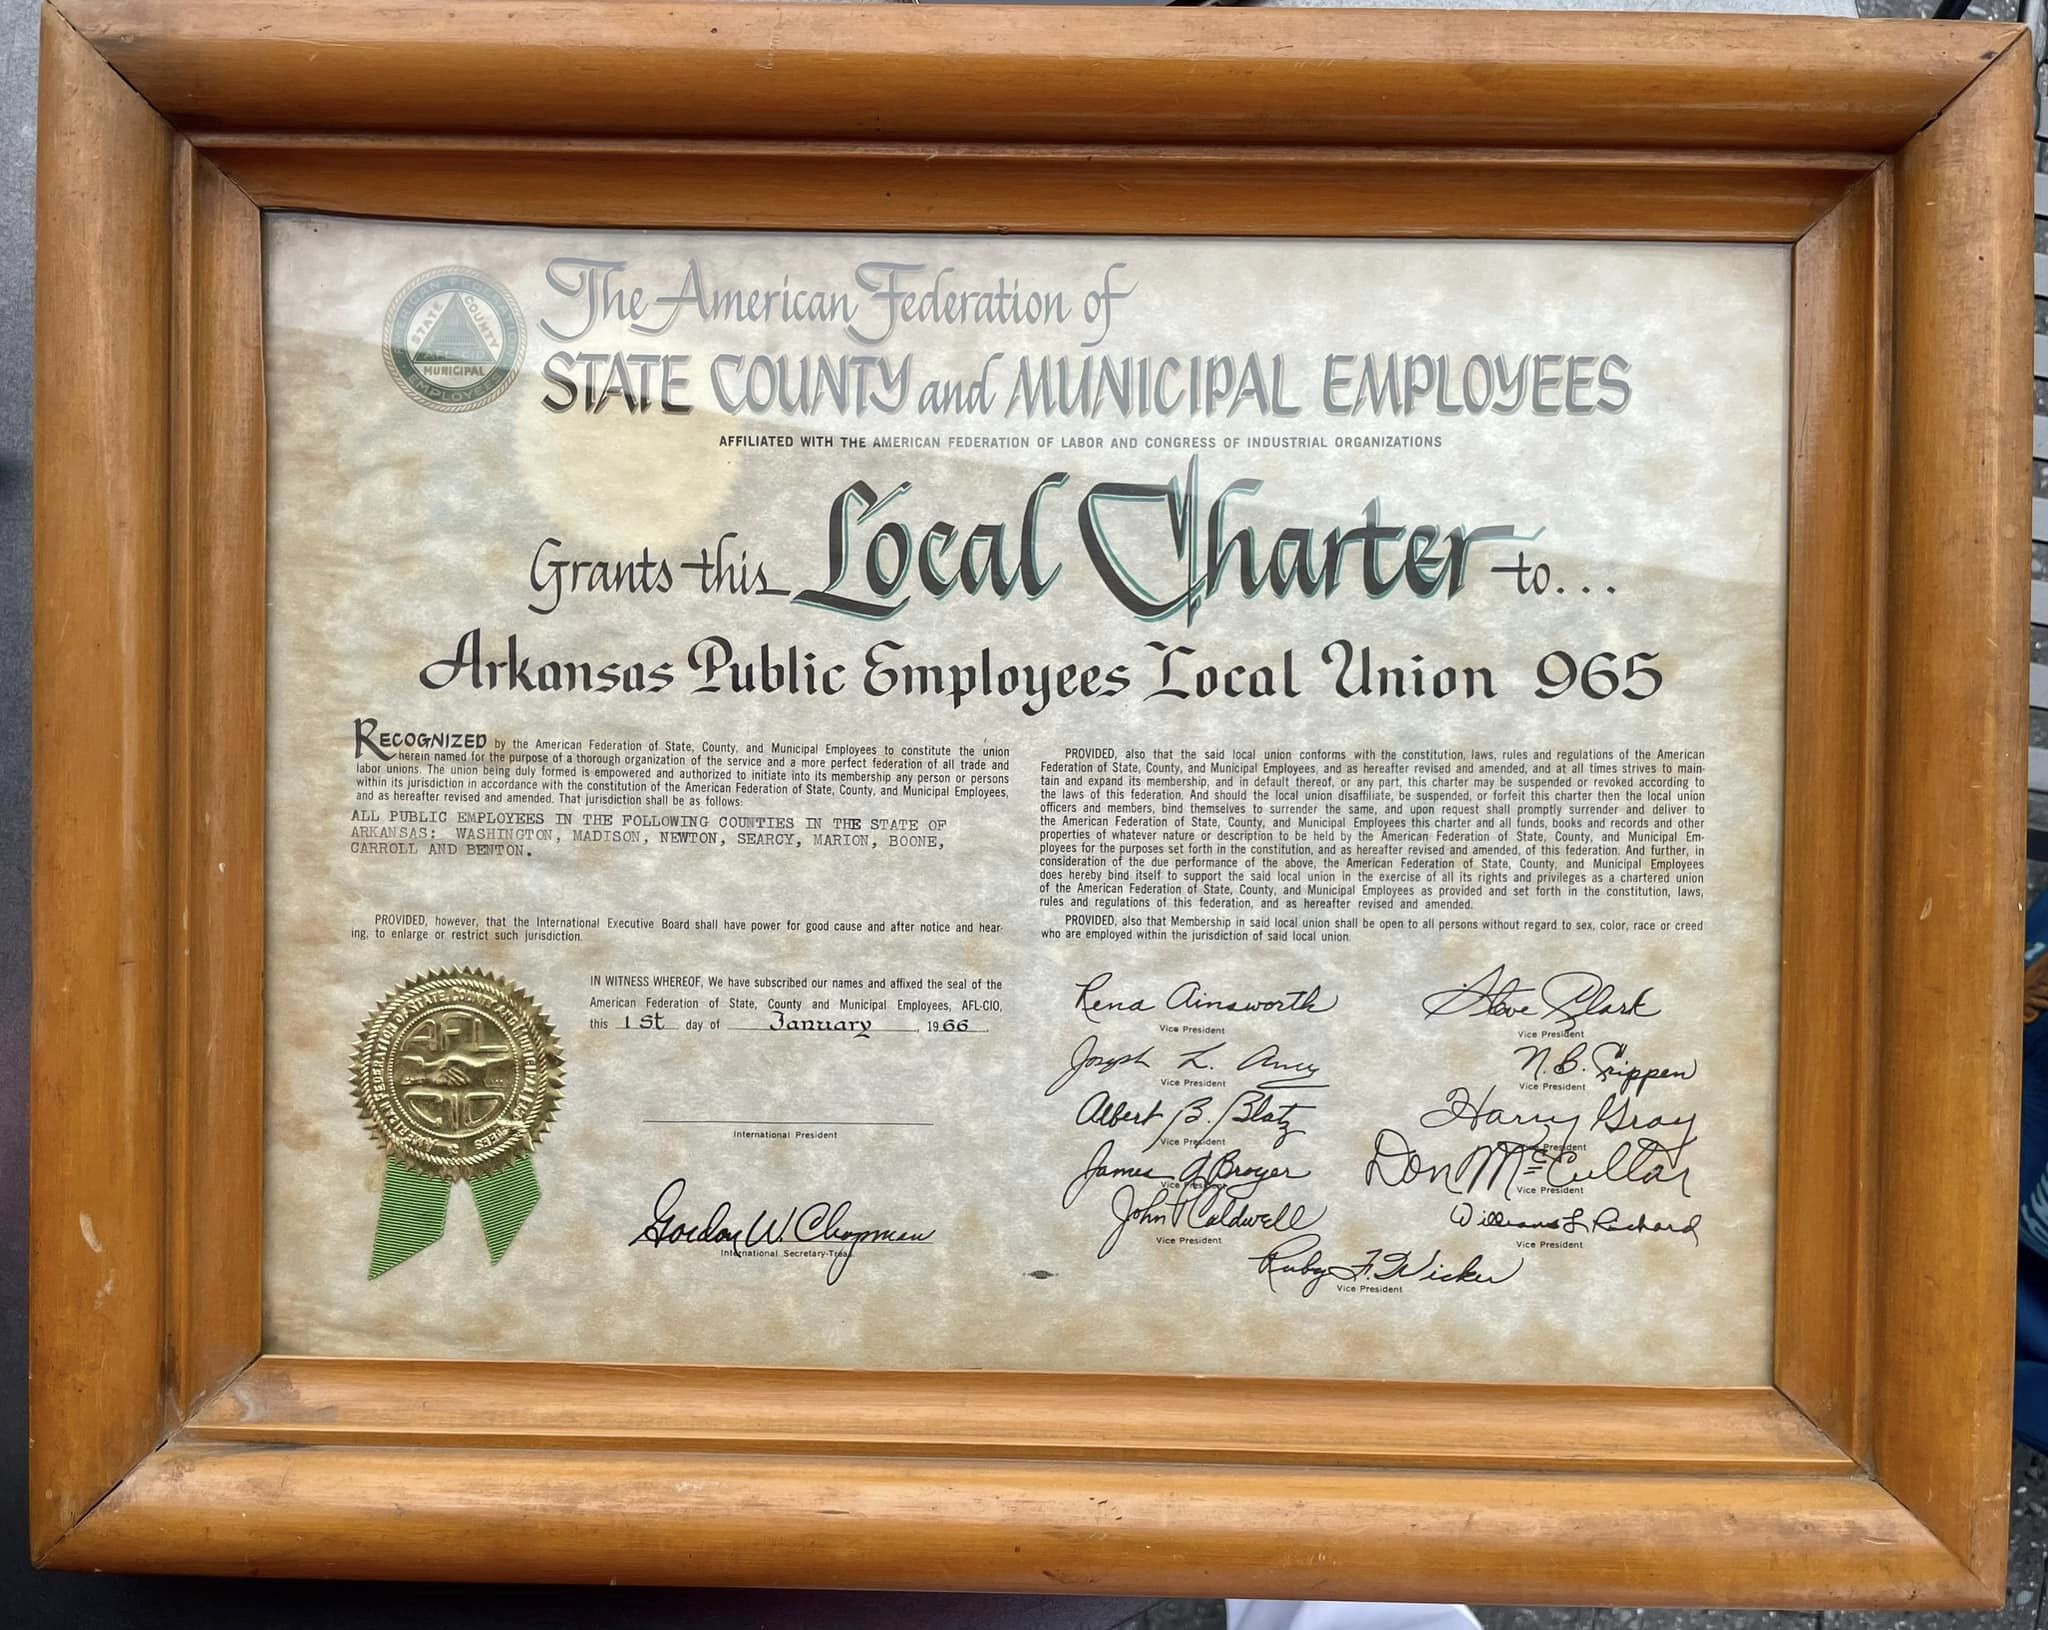 The 1966 charter of what originally was called Arkansas Public Employees Local Union 965